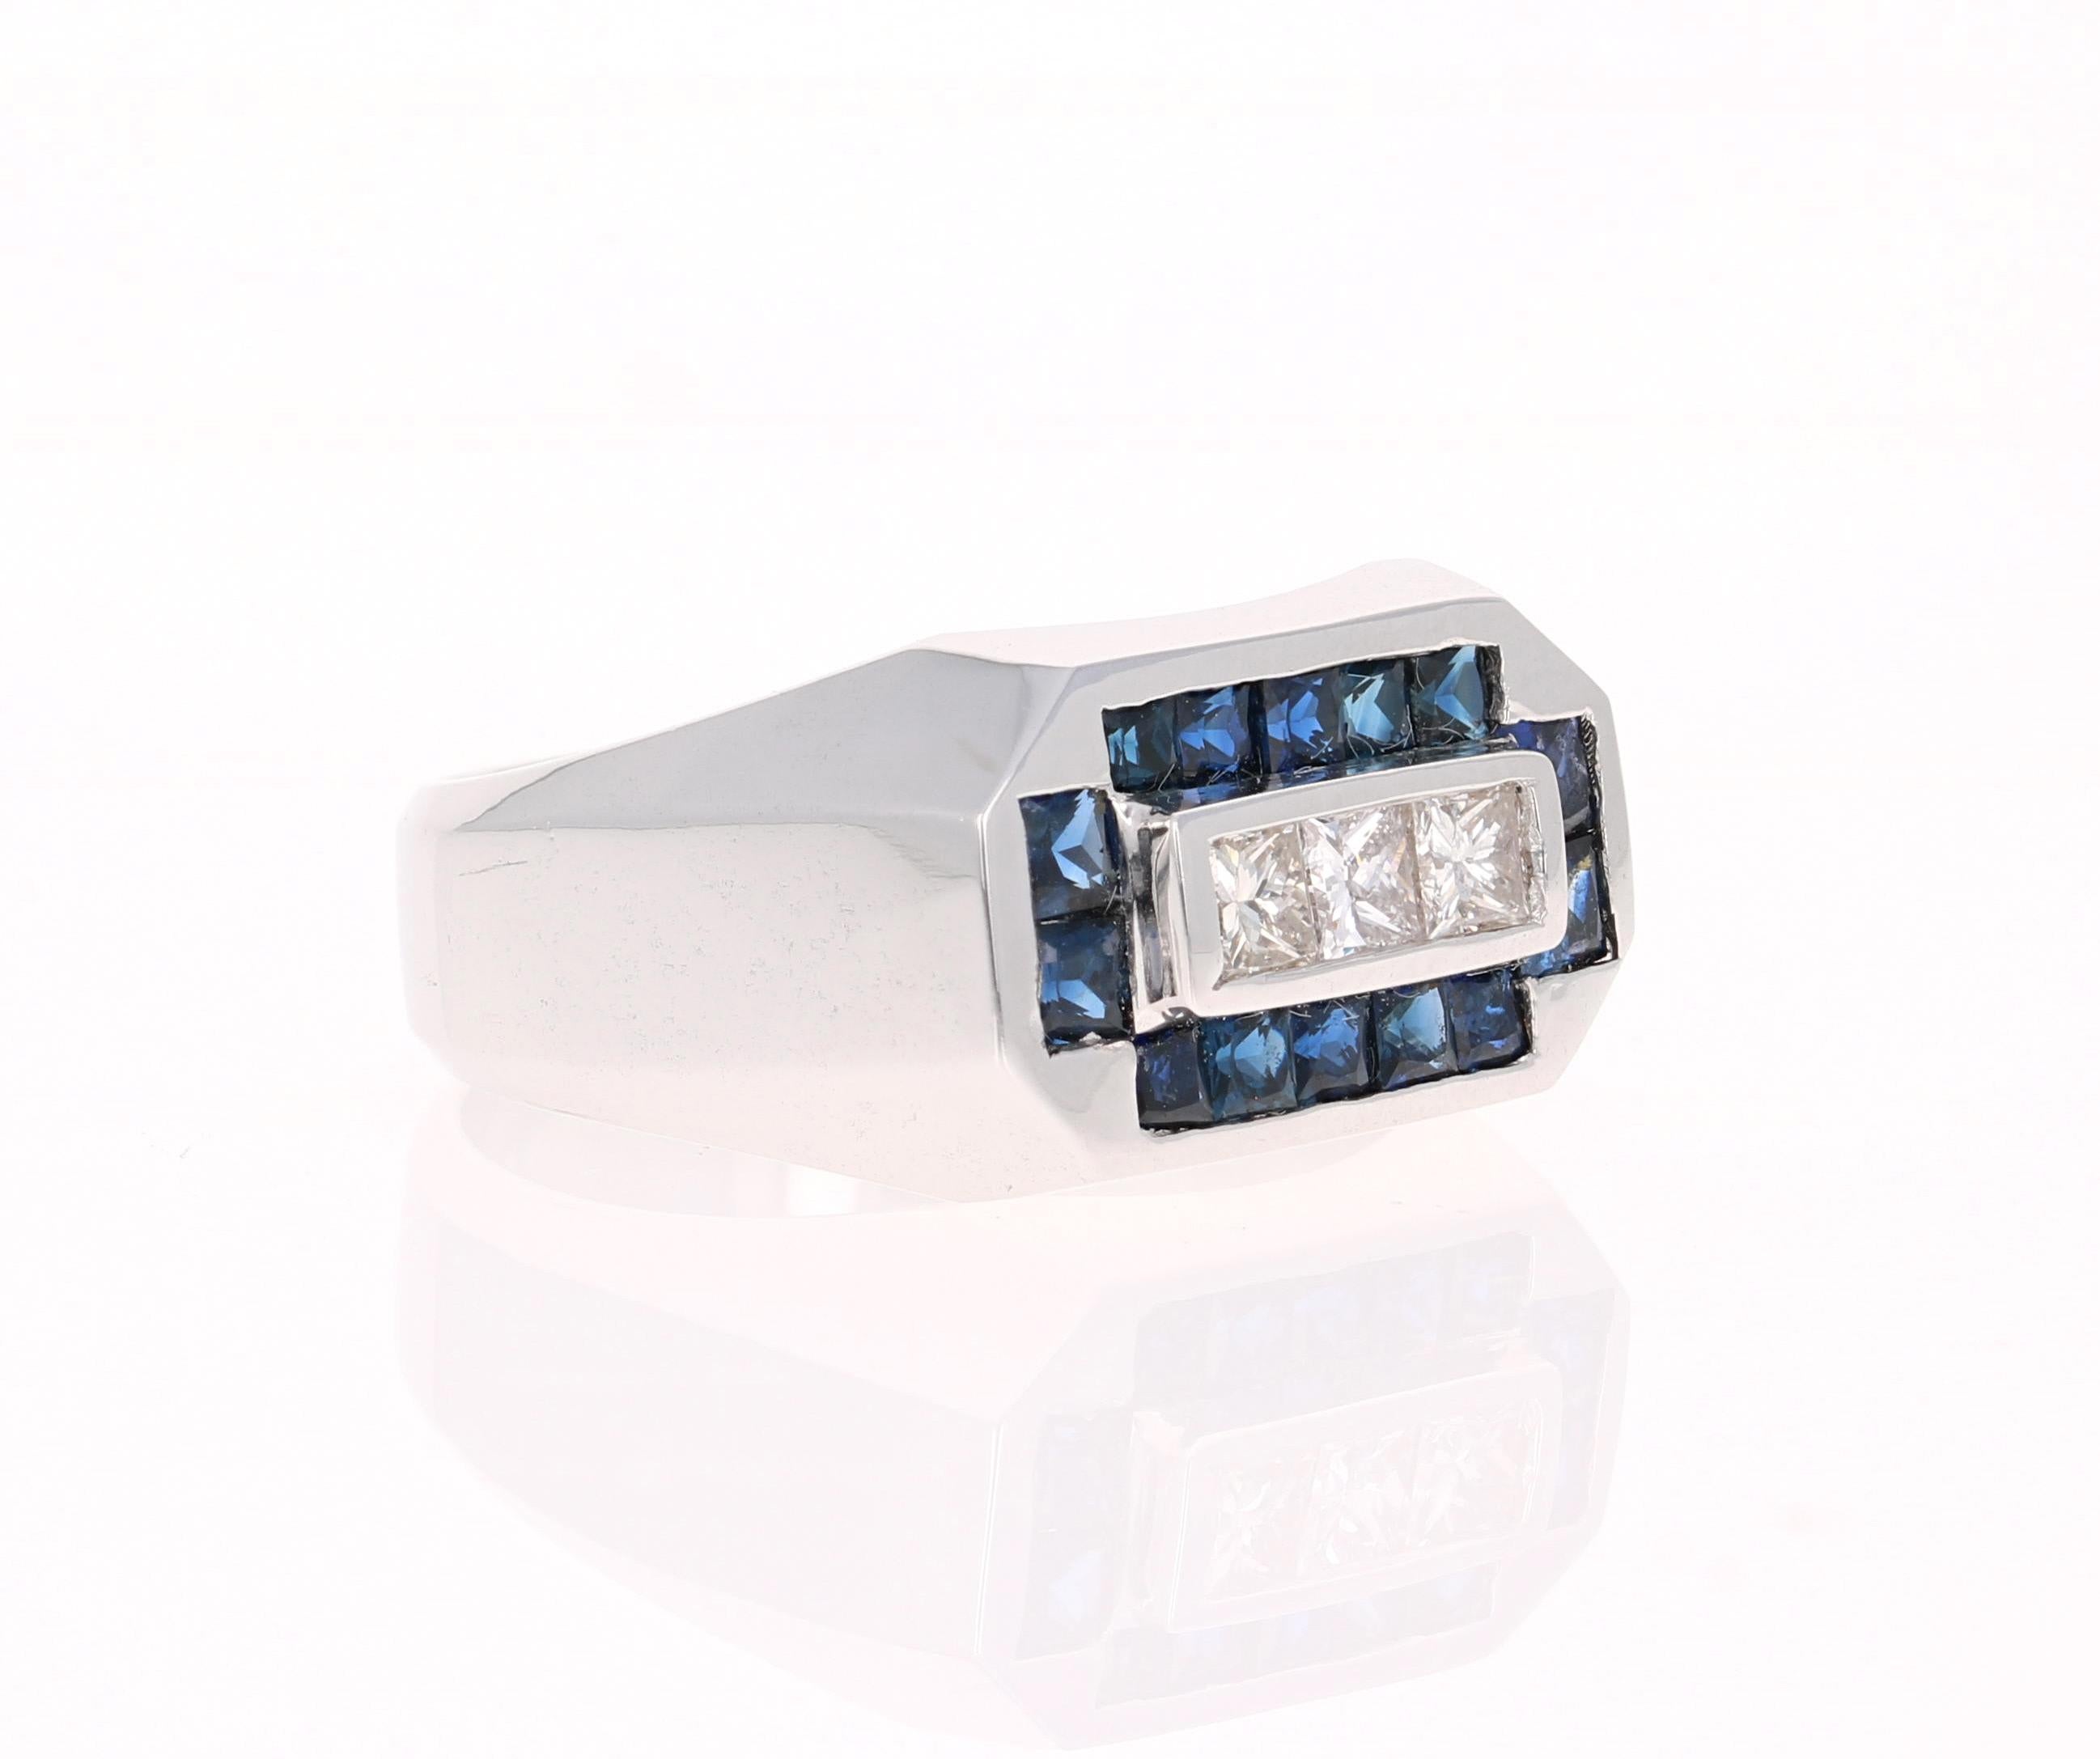 We also carry a unique Men's Collection of Wedding Bands & Rings! 

This amazing piece is set with 14 Sapphires that weigh 1.60 Carats and 3 Princess Cut Diamonds that weigh 0.66 Carats. The Total Carat Weight of the ring is 2.26 Carats. 

It is